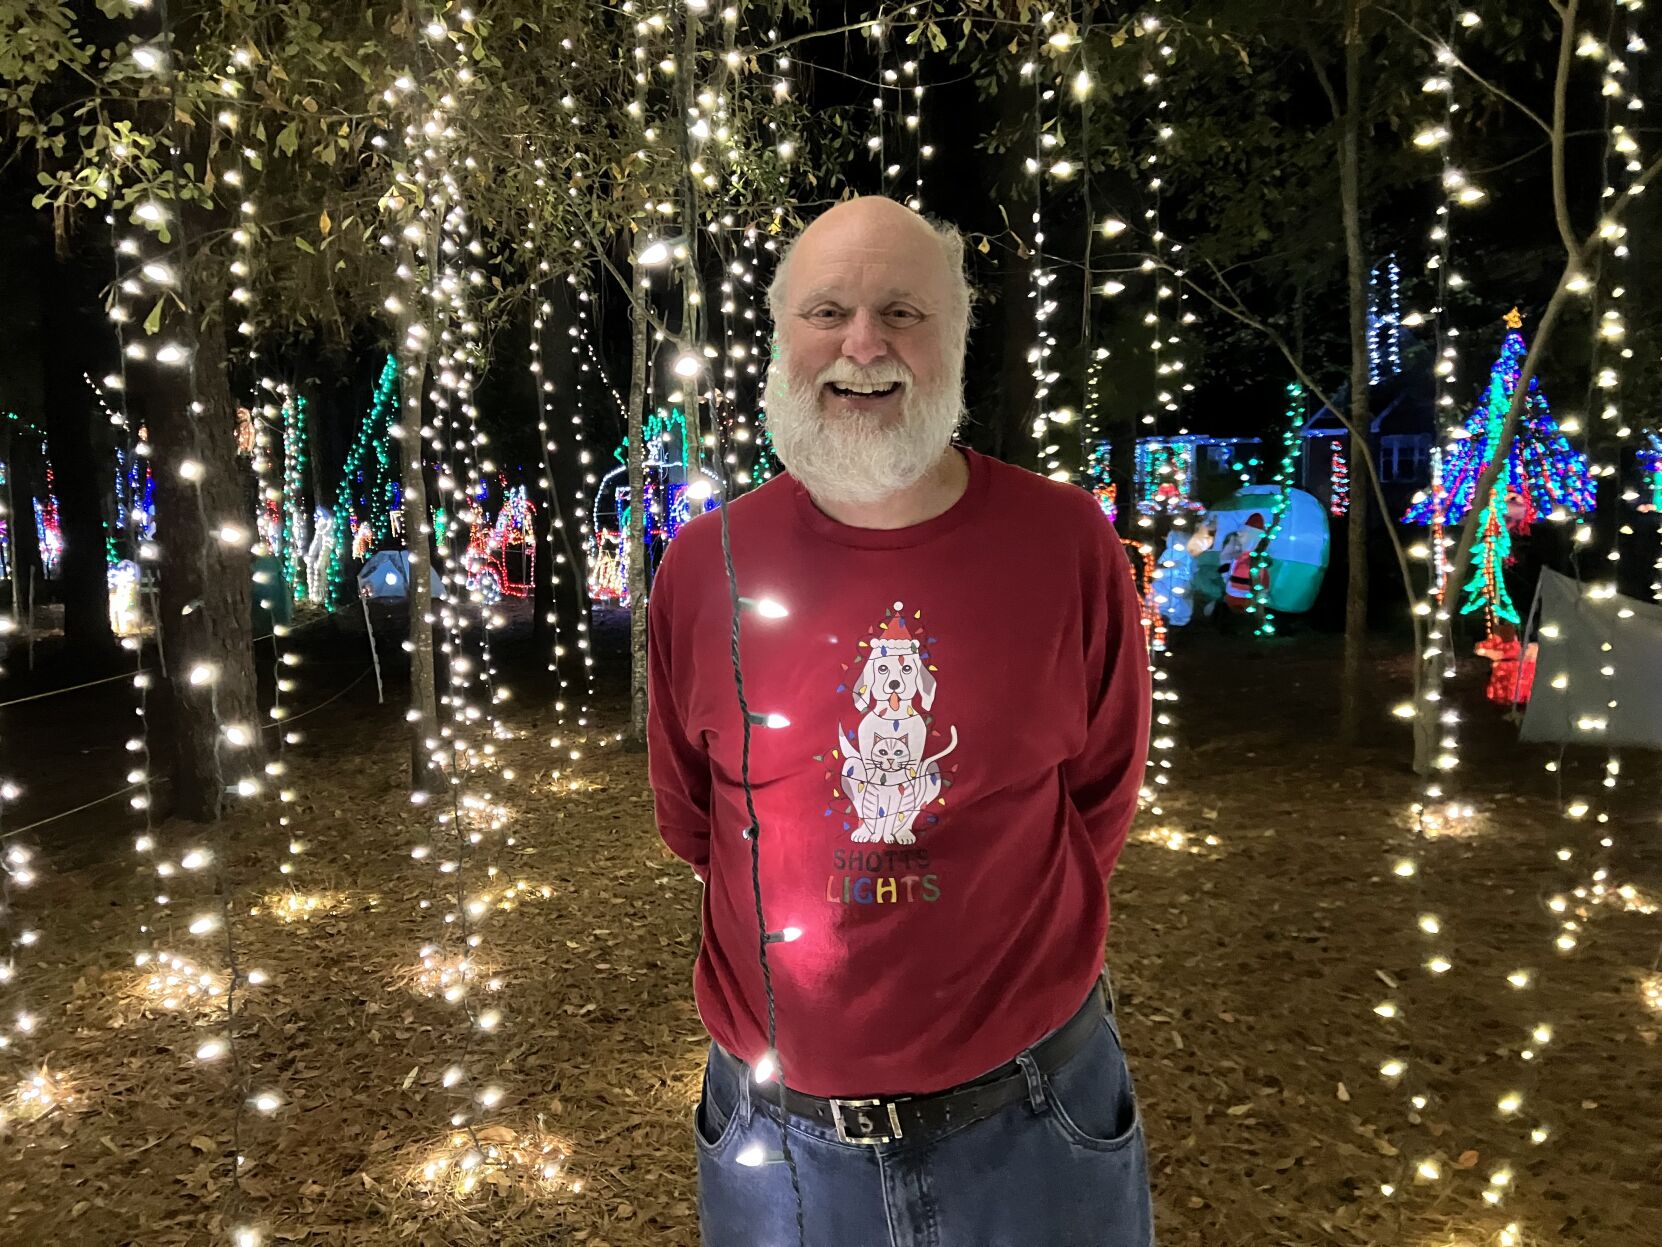 Christmas joy makes the work worth it for SC family featured on The Great Christmas Light Fight